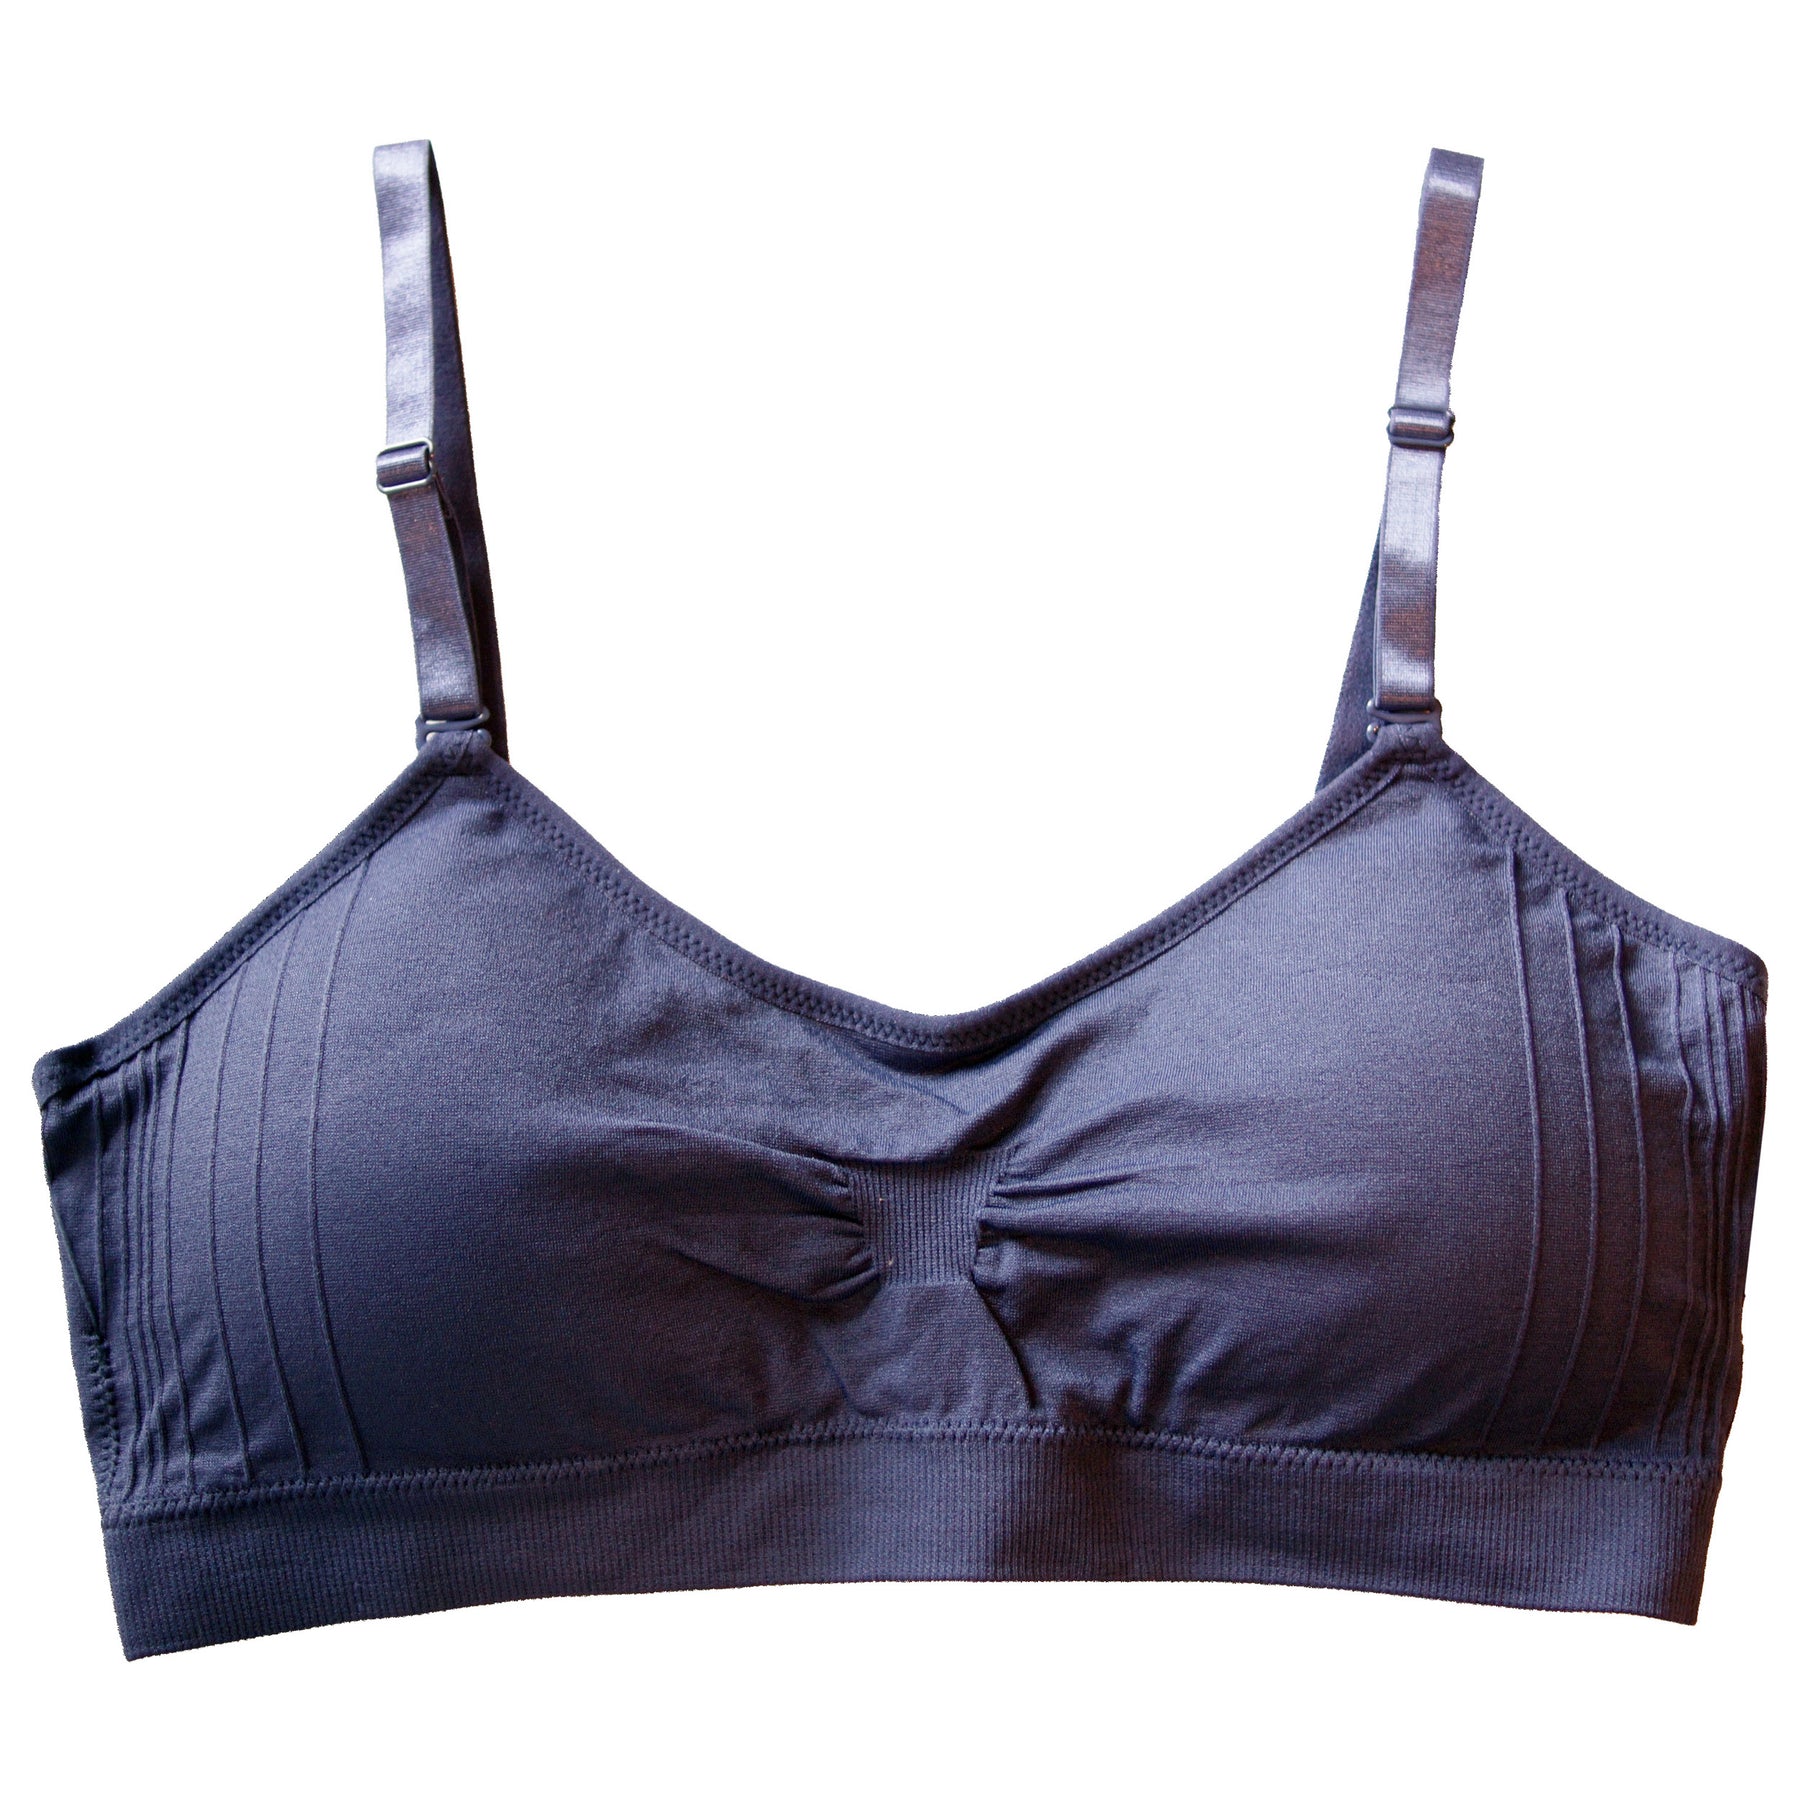 Mom Knows Best: Coobie Is The Best Lingerie For Daily Comfort